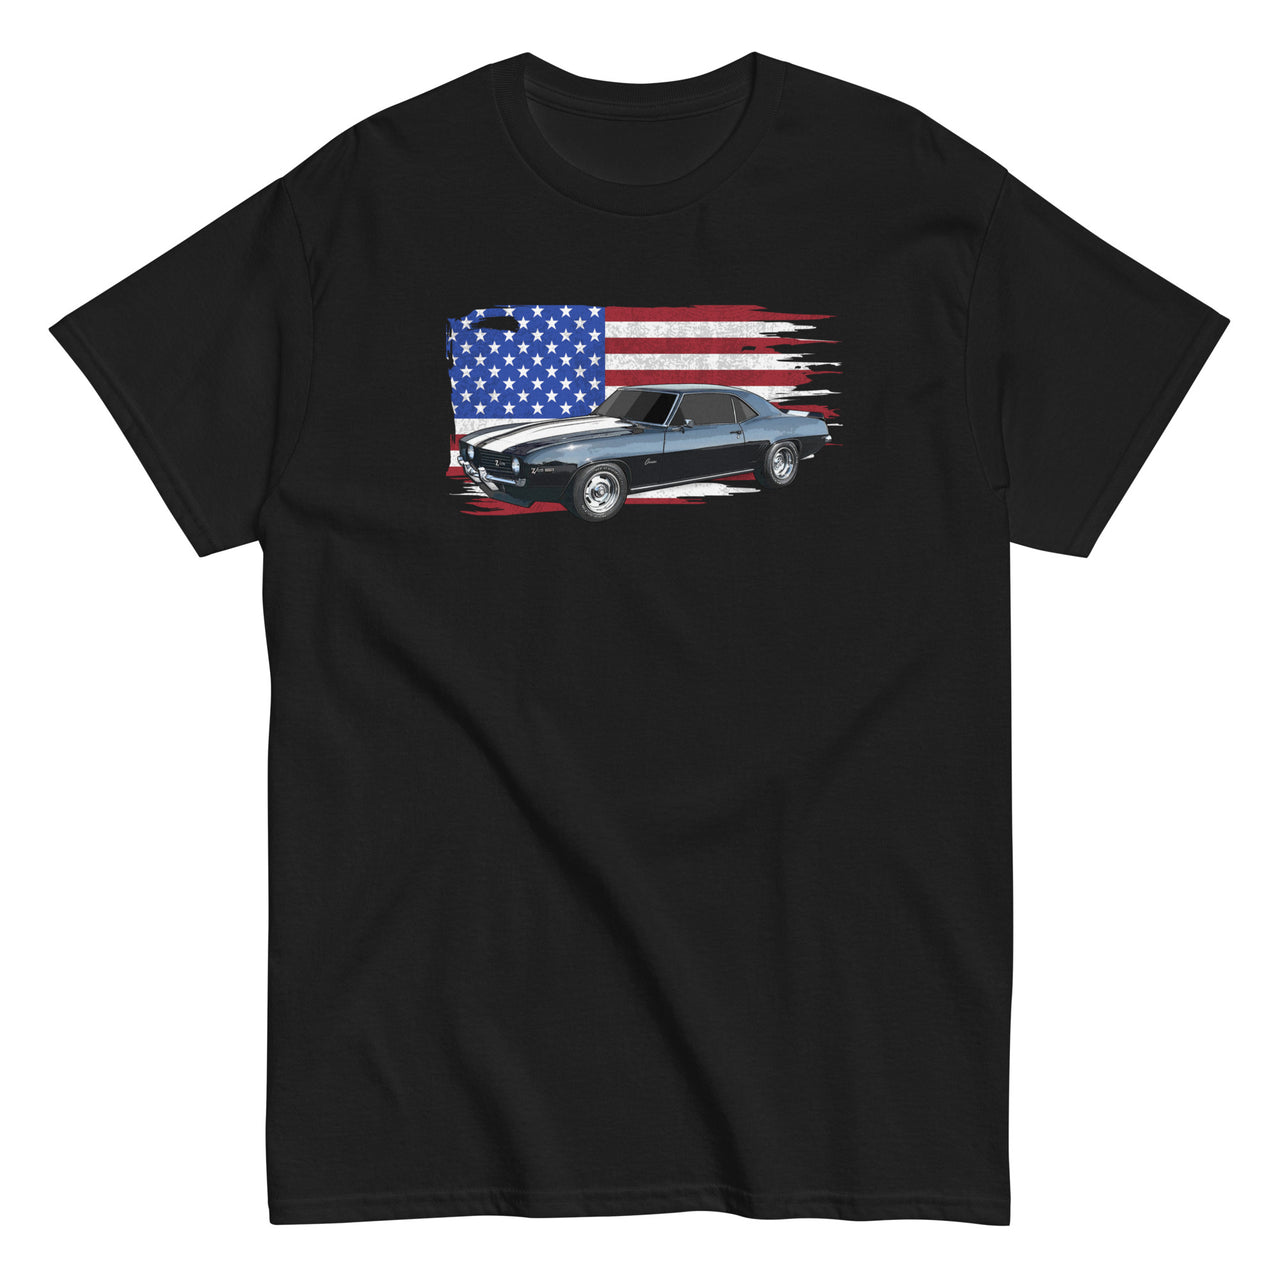 69 Camaro T-Shirt With American Flag Background - Black